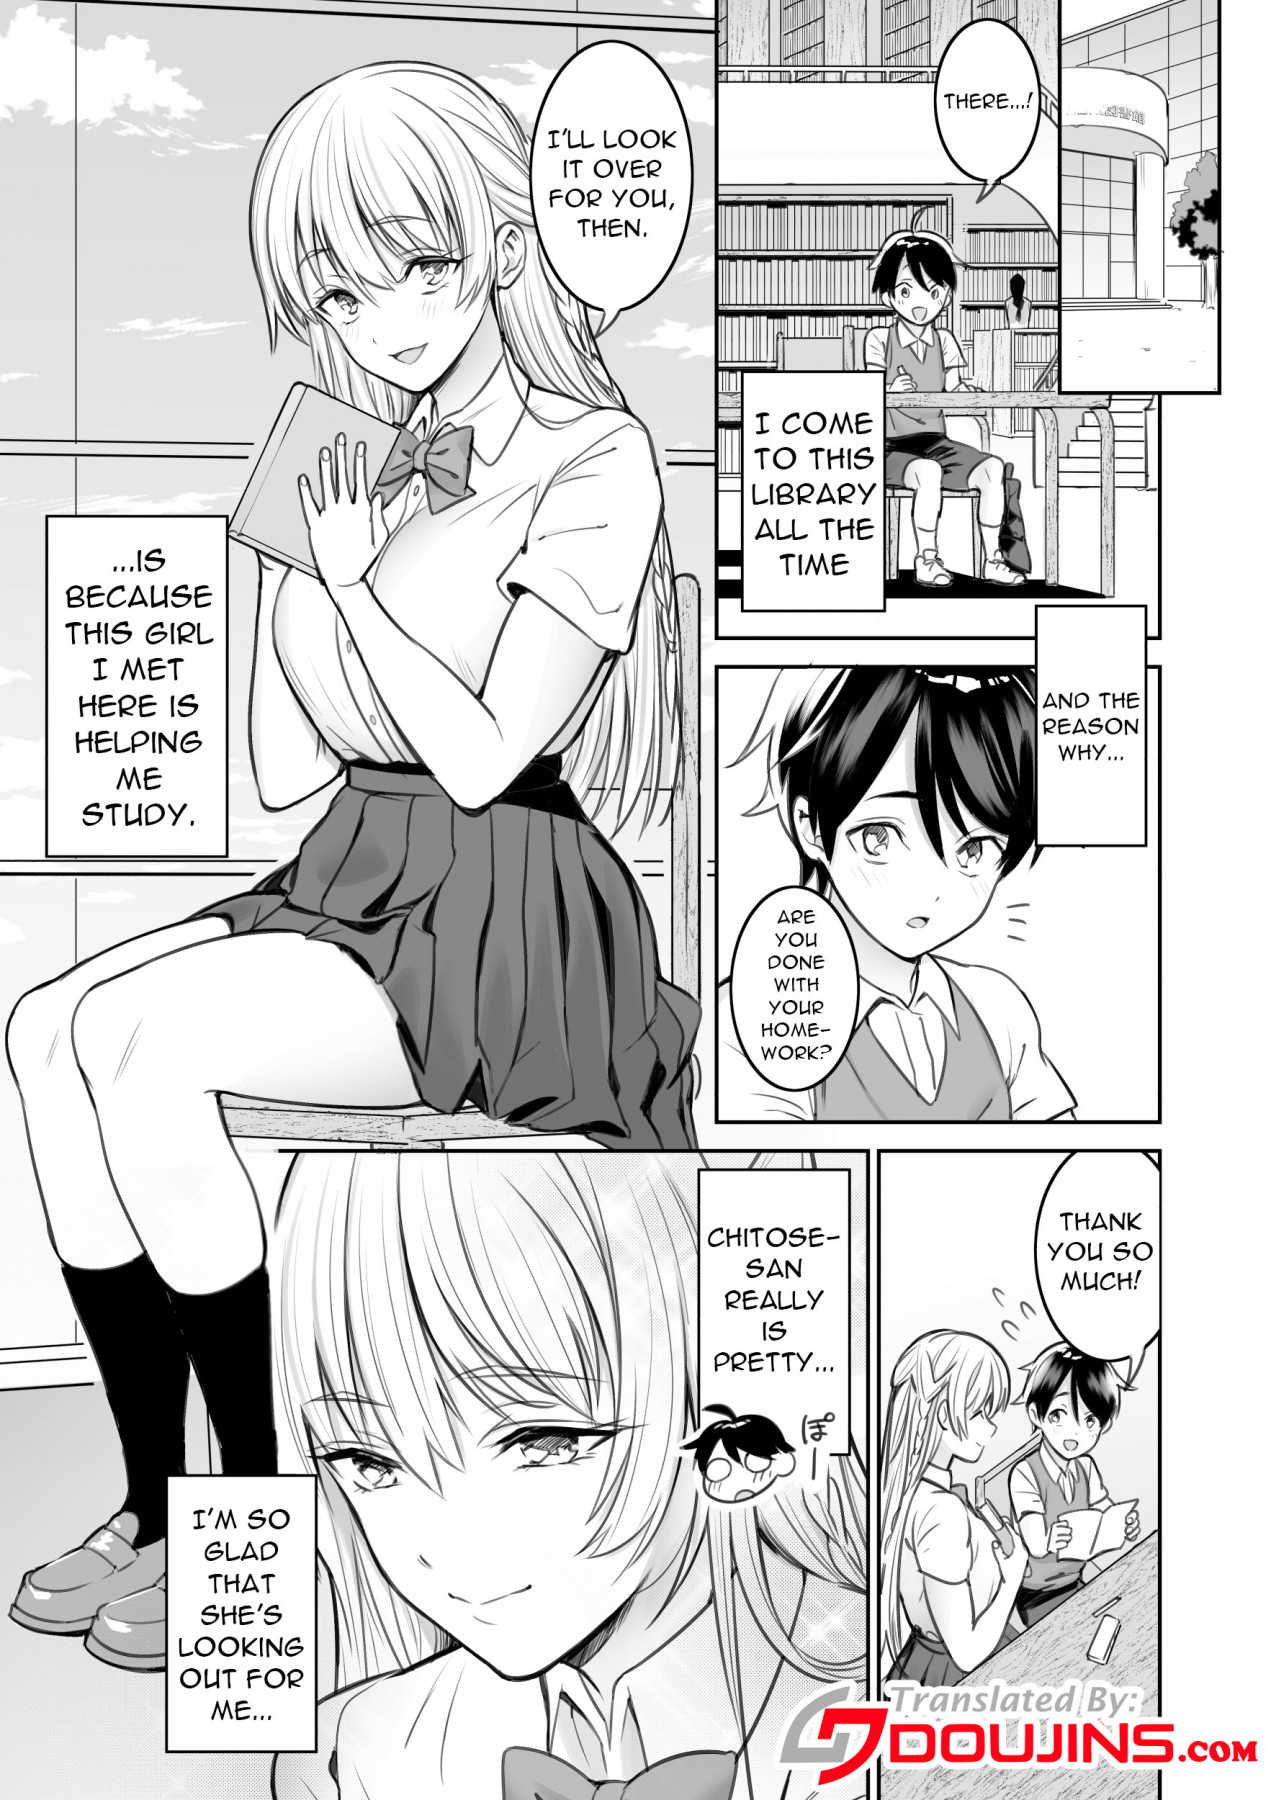 Hentai Manga Comic-A Story About Having Sex With a Girl I Met In The Library-Read-2